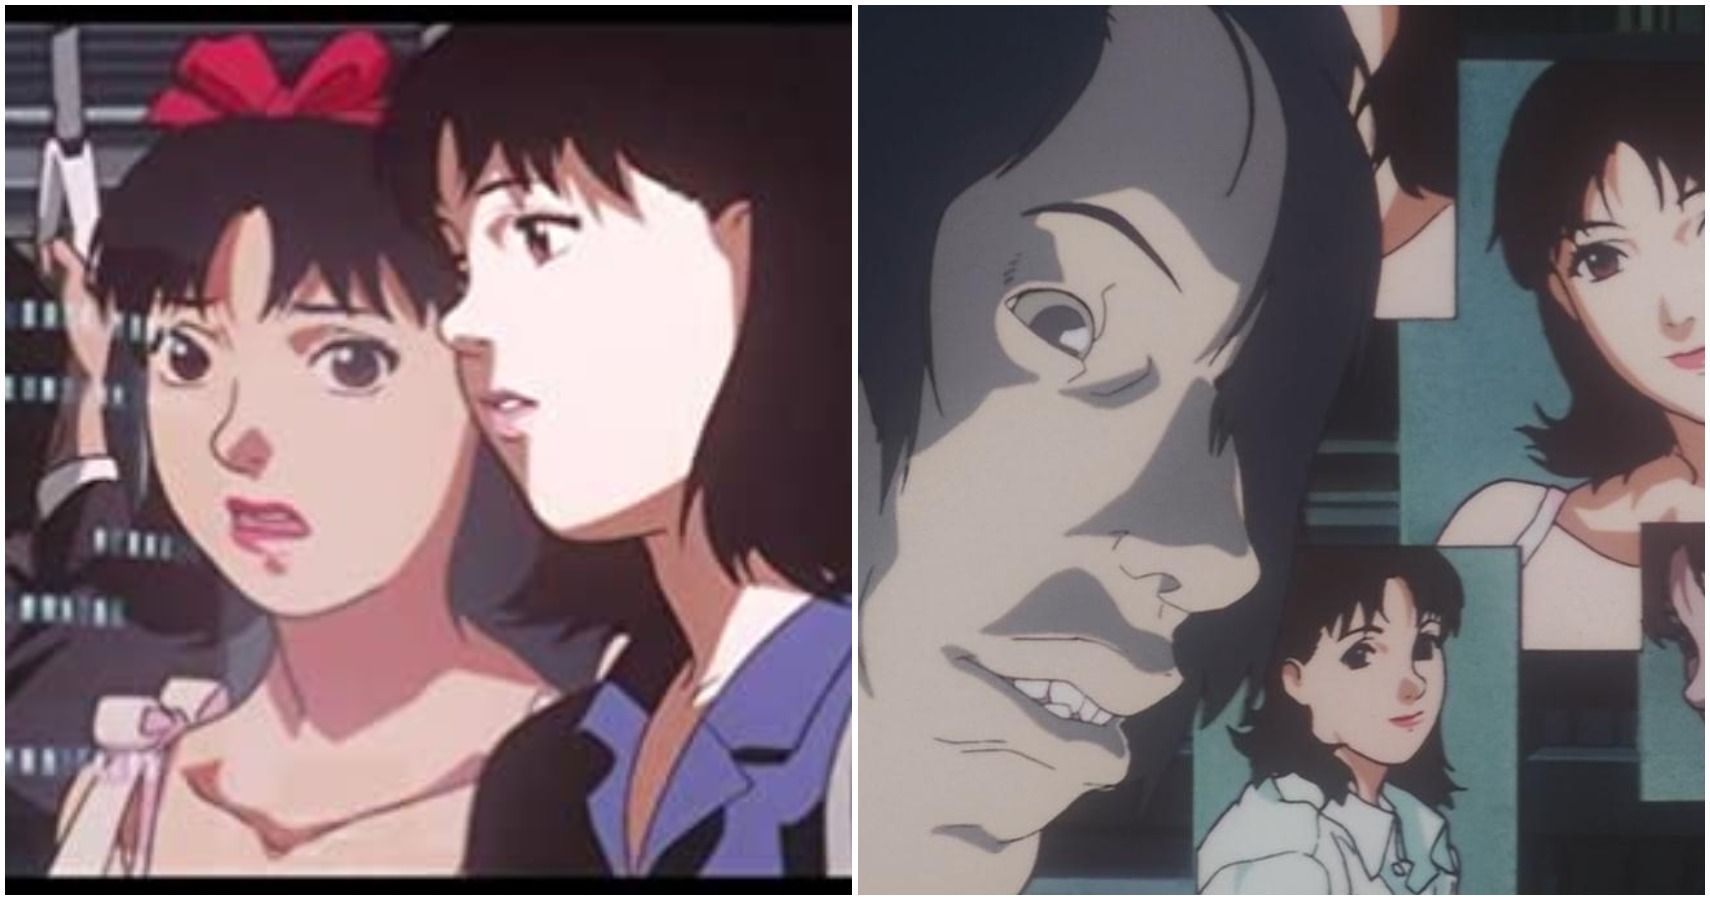 Perfect Blue: 10 Things You Never Knew About This Haunting Anime Movie